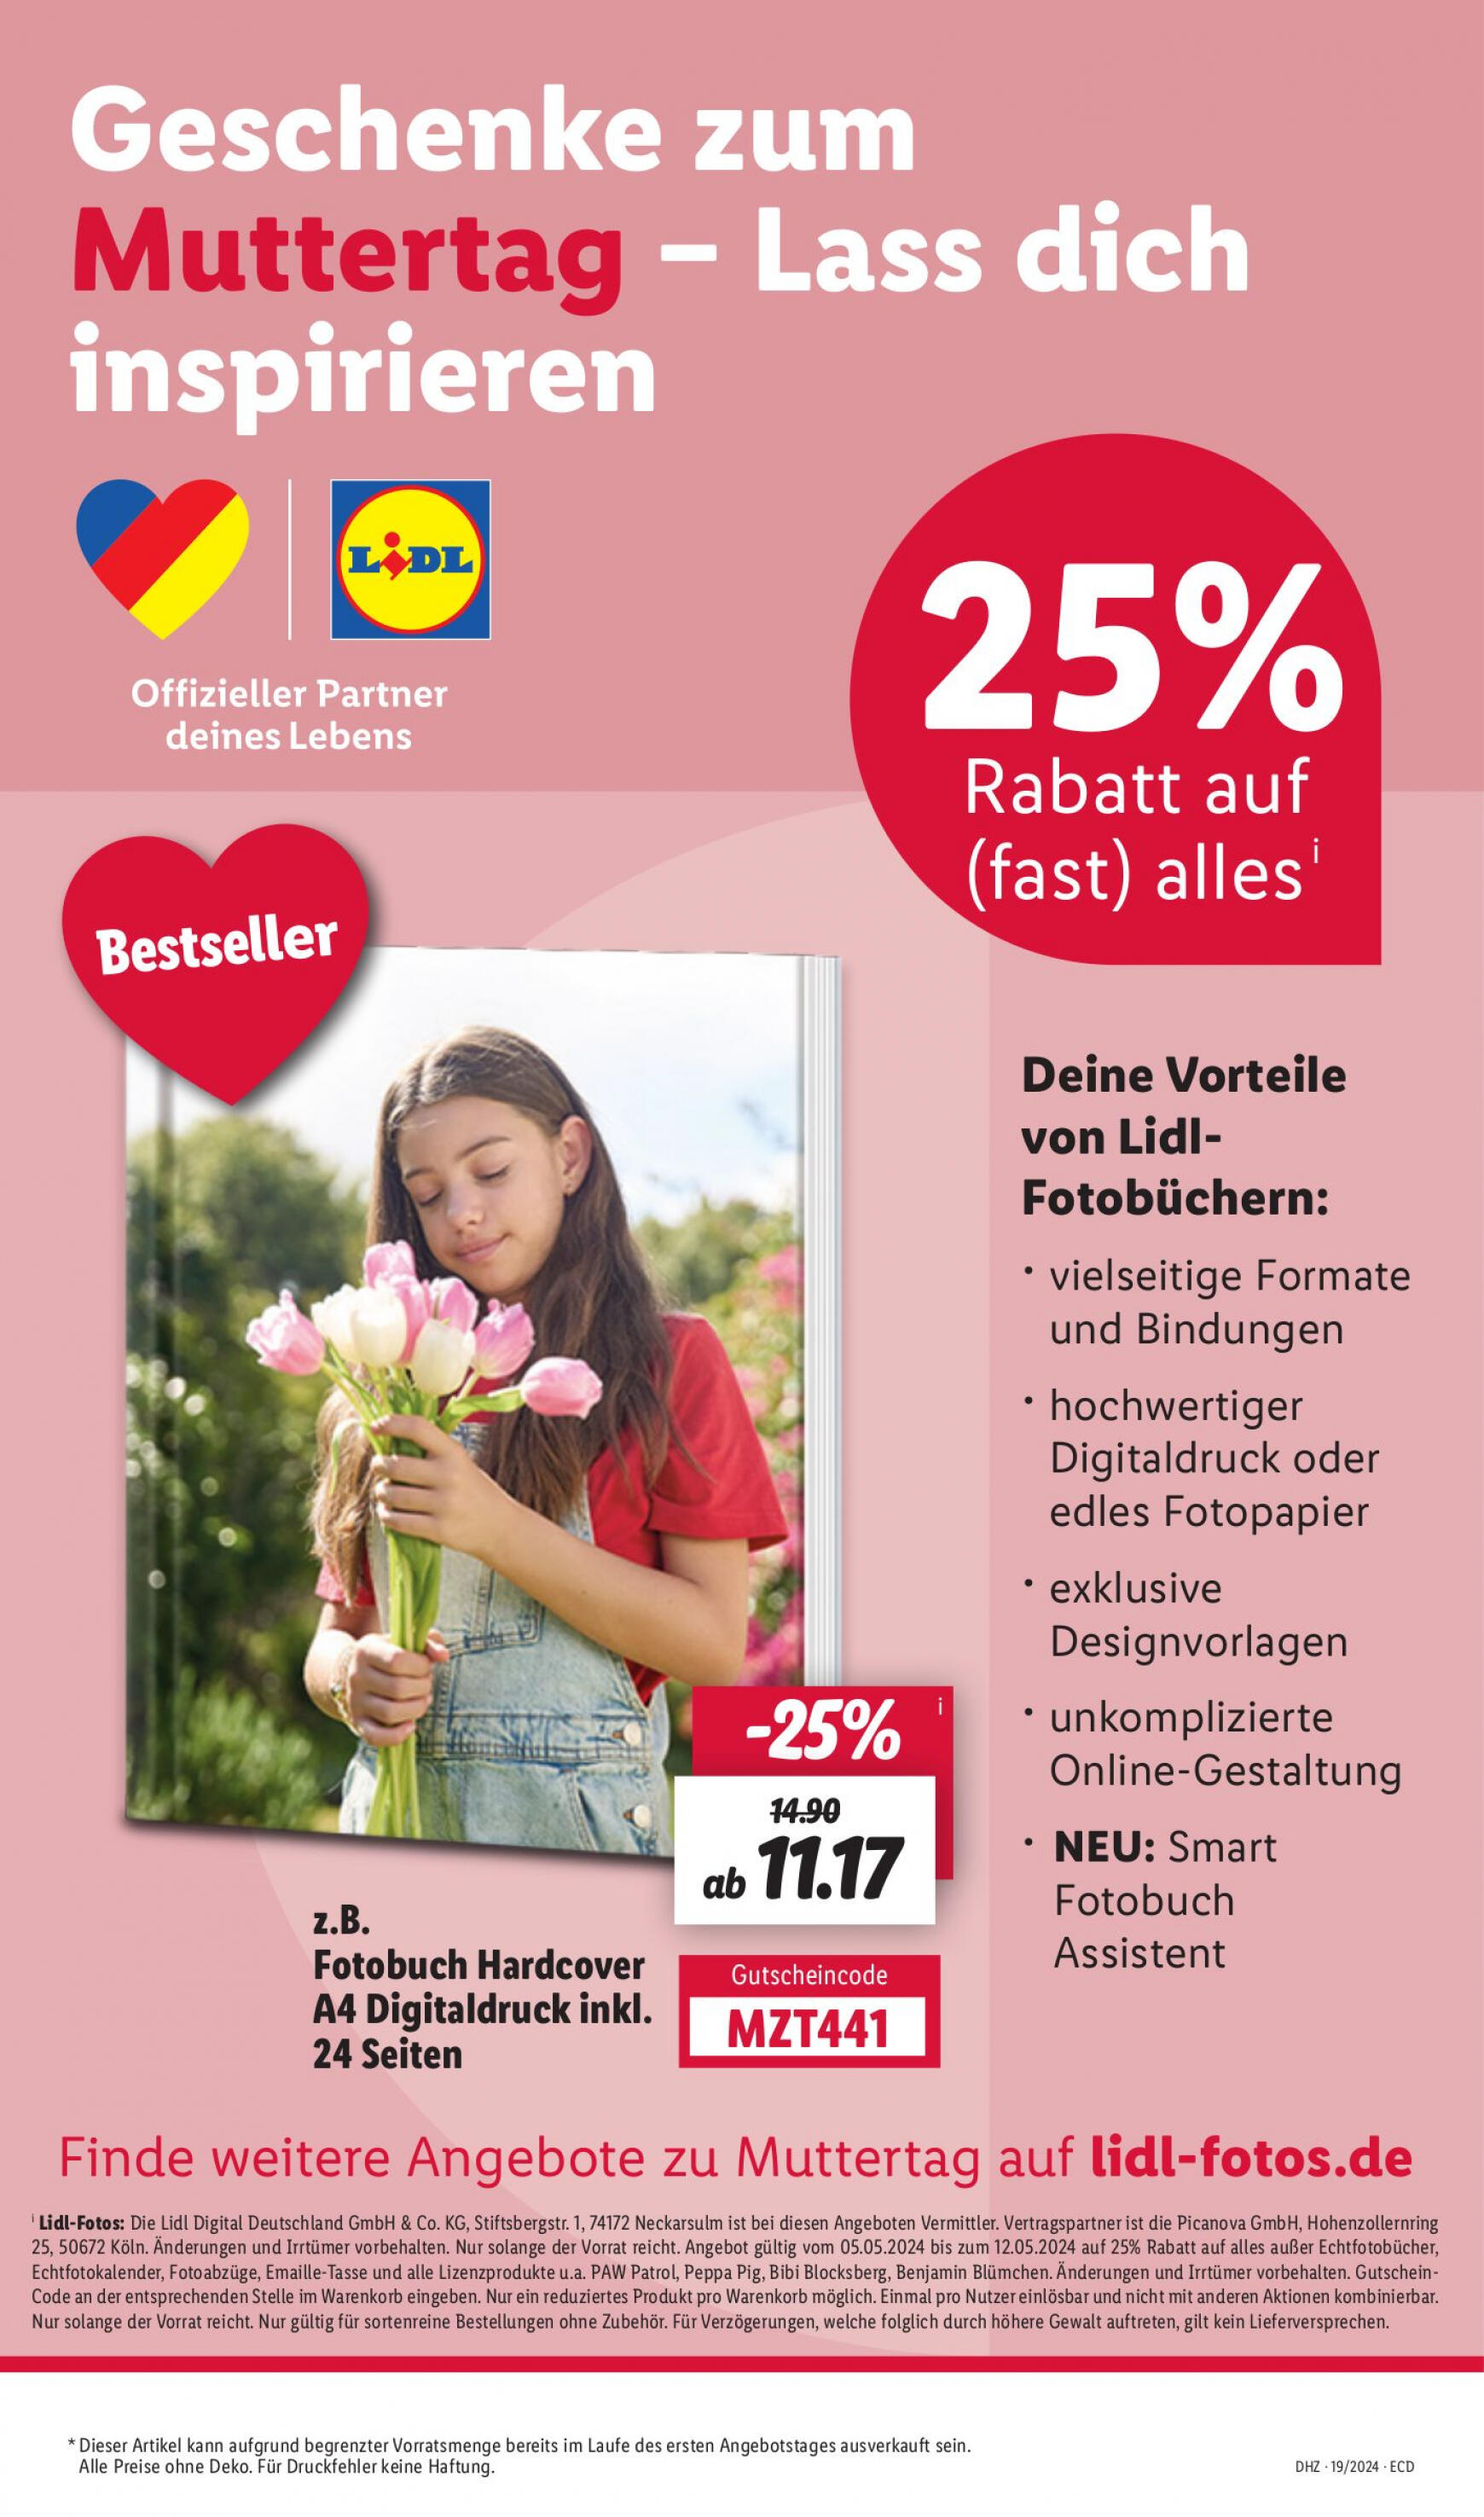 lidl - Flyer Lidl aktuell 06.05. - 11.05. - page: 49